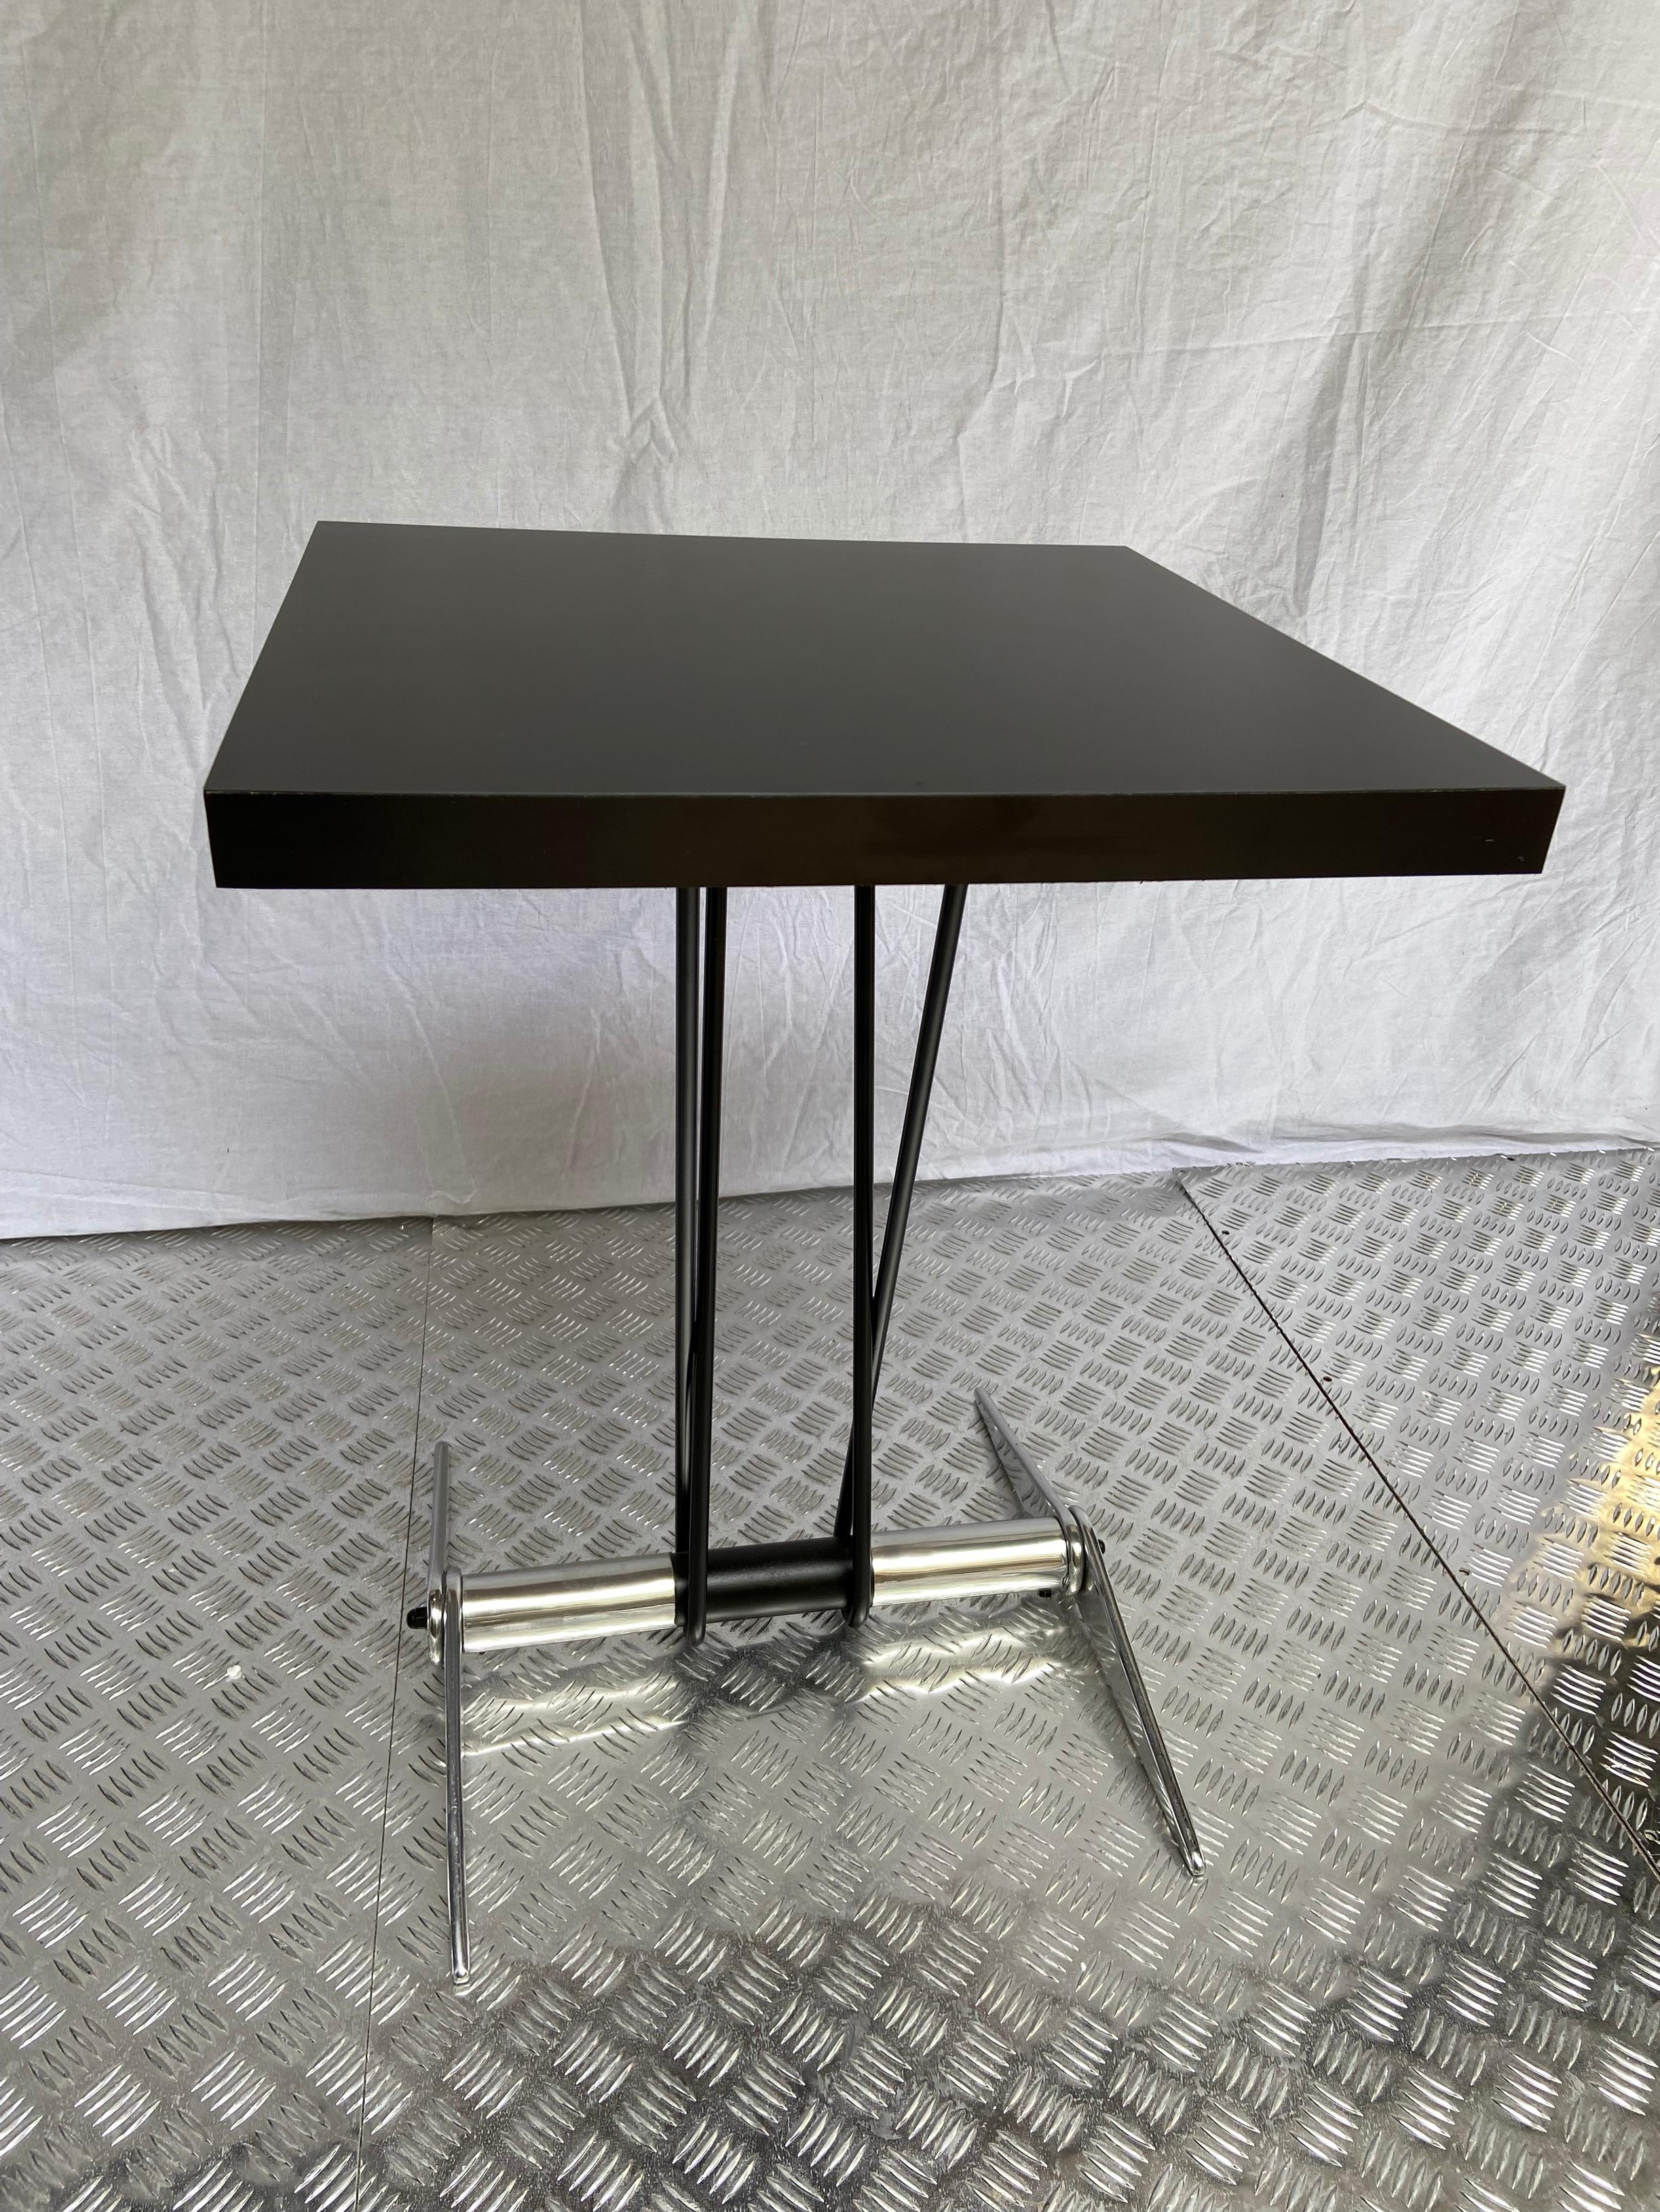 Cafeteria table - Jean Prouvé - 1938

Black melamine recently redone
Black lacquered steel structure and aluminum base
Measures: 54.5 x 54.5 x 73 cm.
 